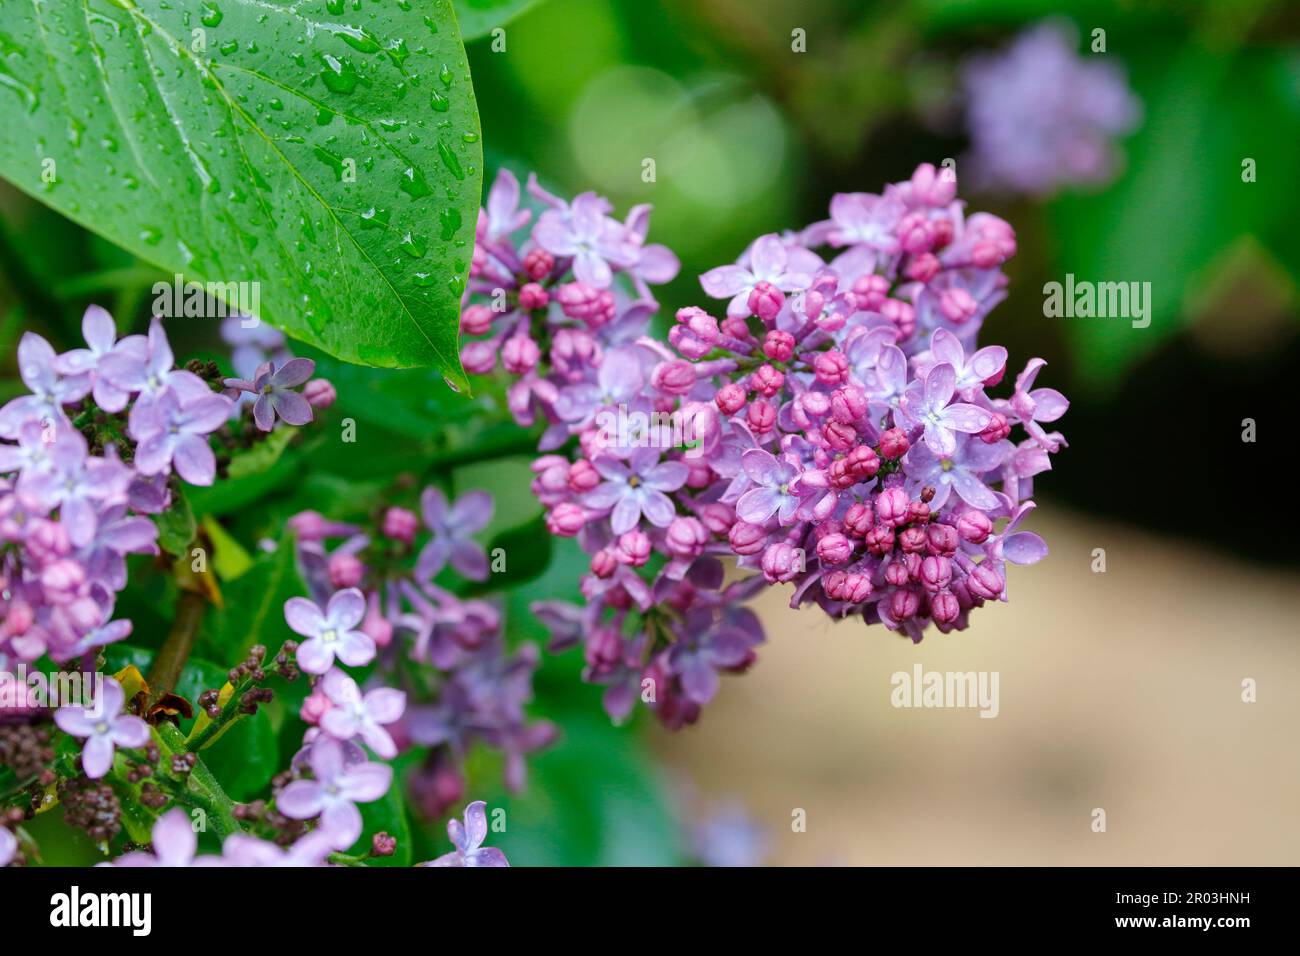 A branch of a lilac bush with purple flowers Stock Photo